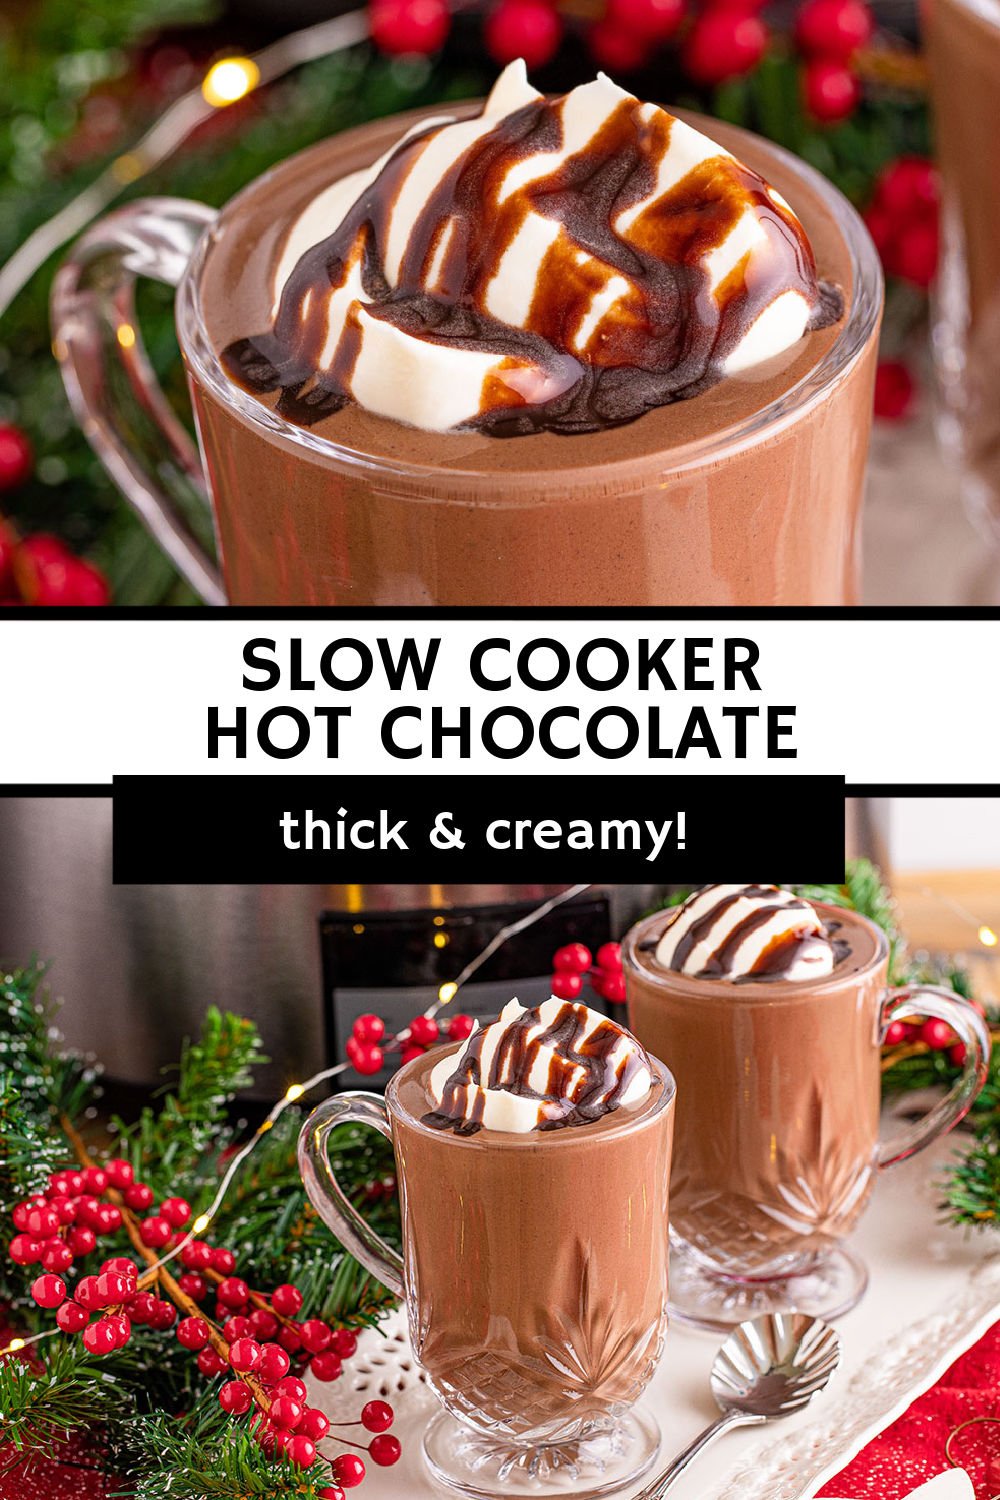 This slow cooker hot chocolate recipe is the BEST! It